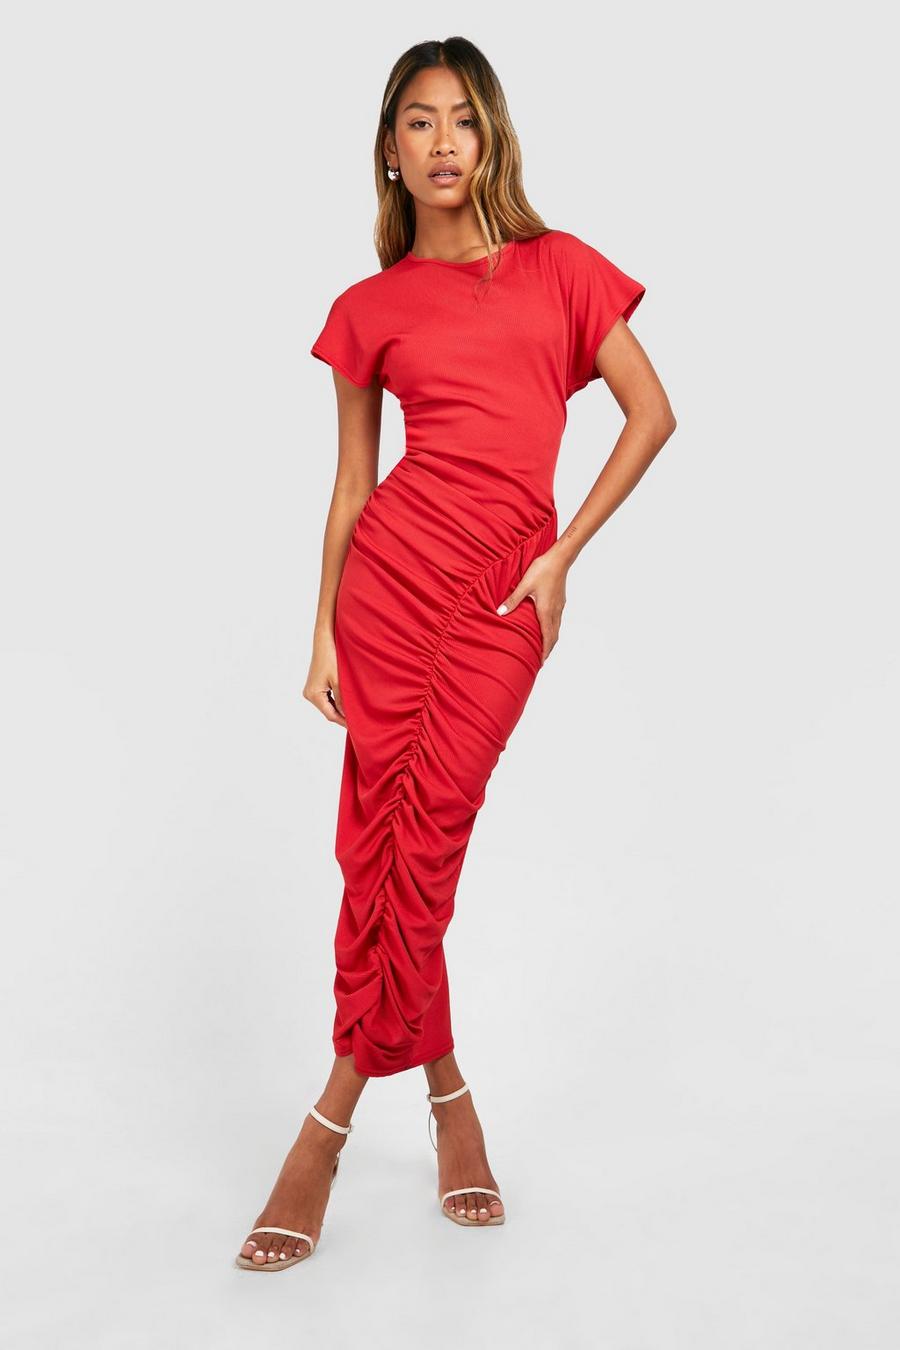 Red Playsuits & Jumpsuits Sale